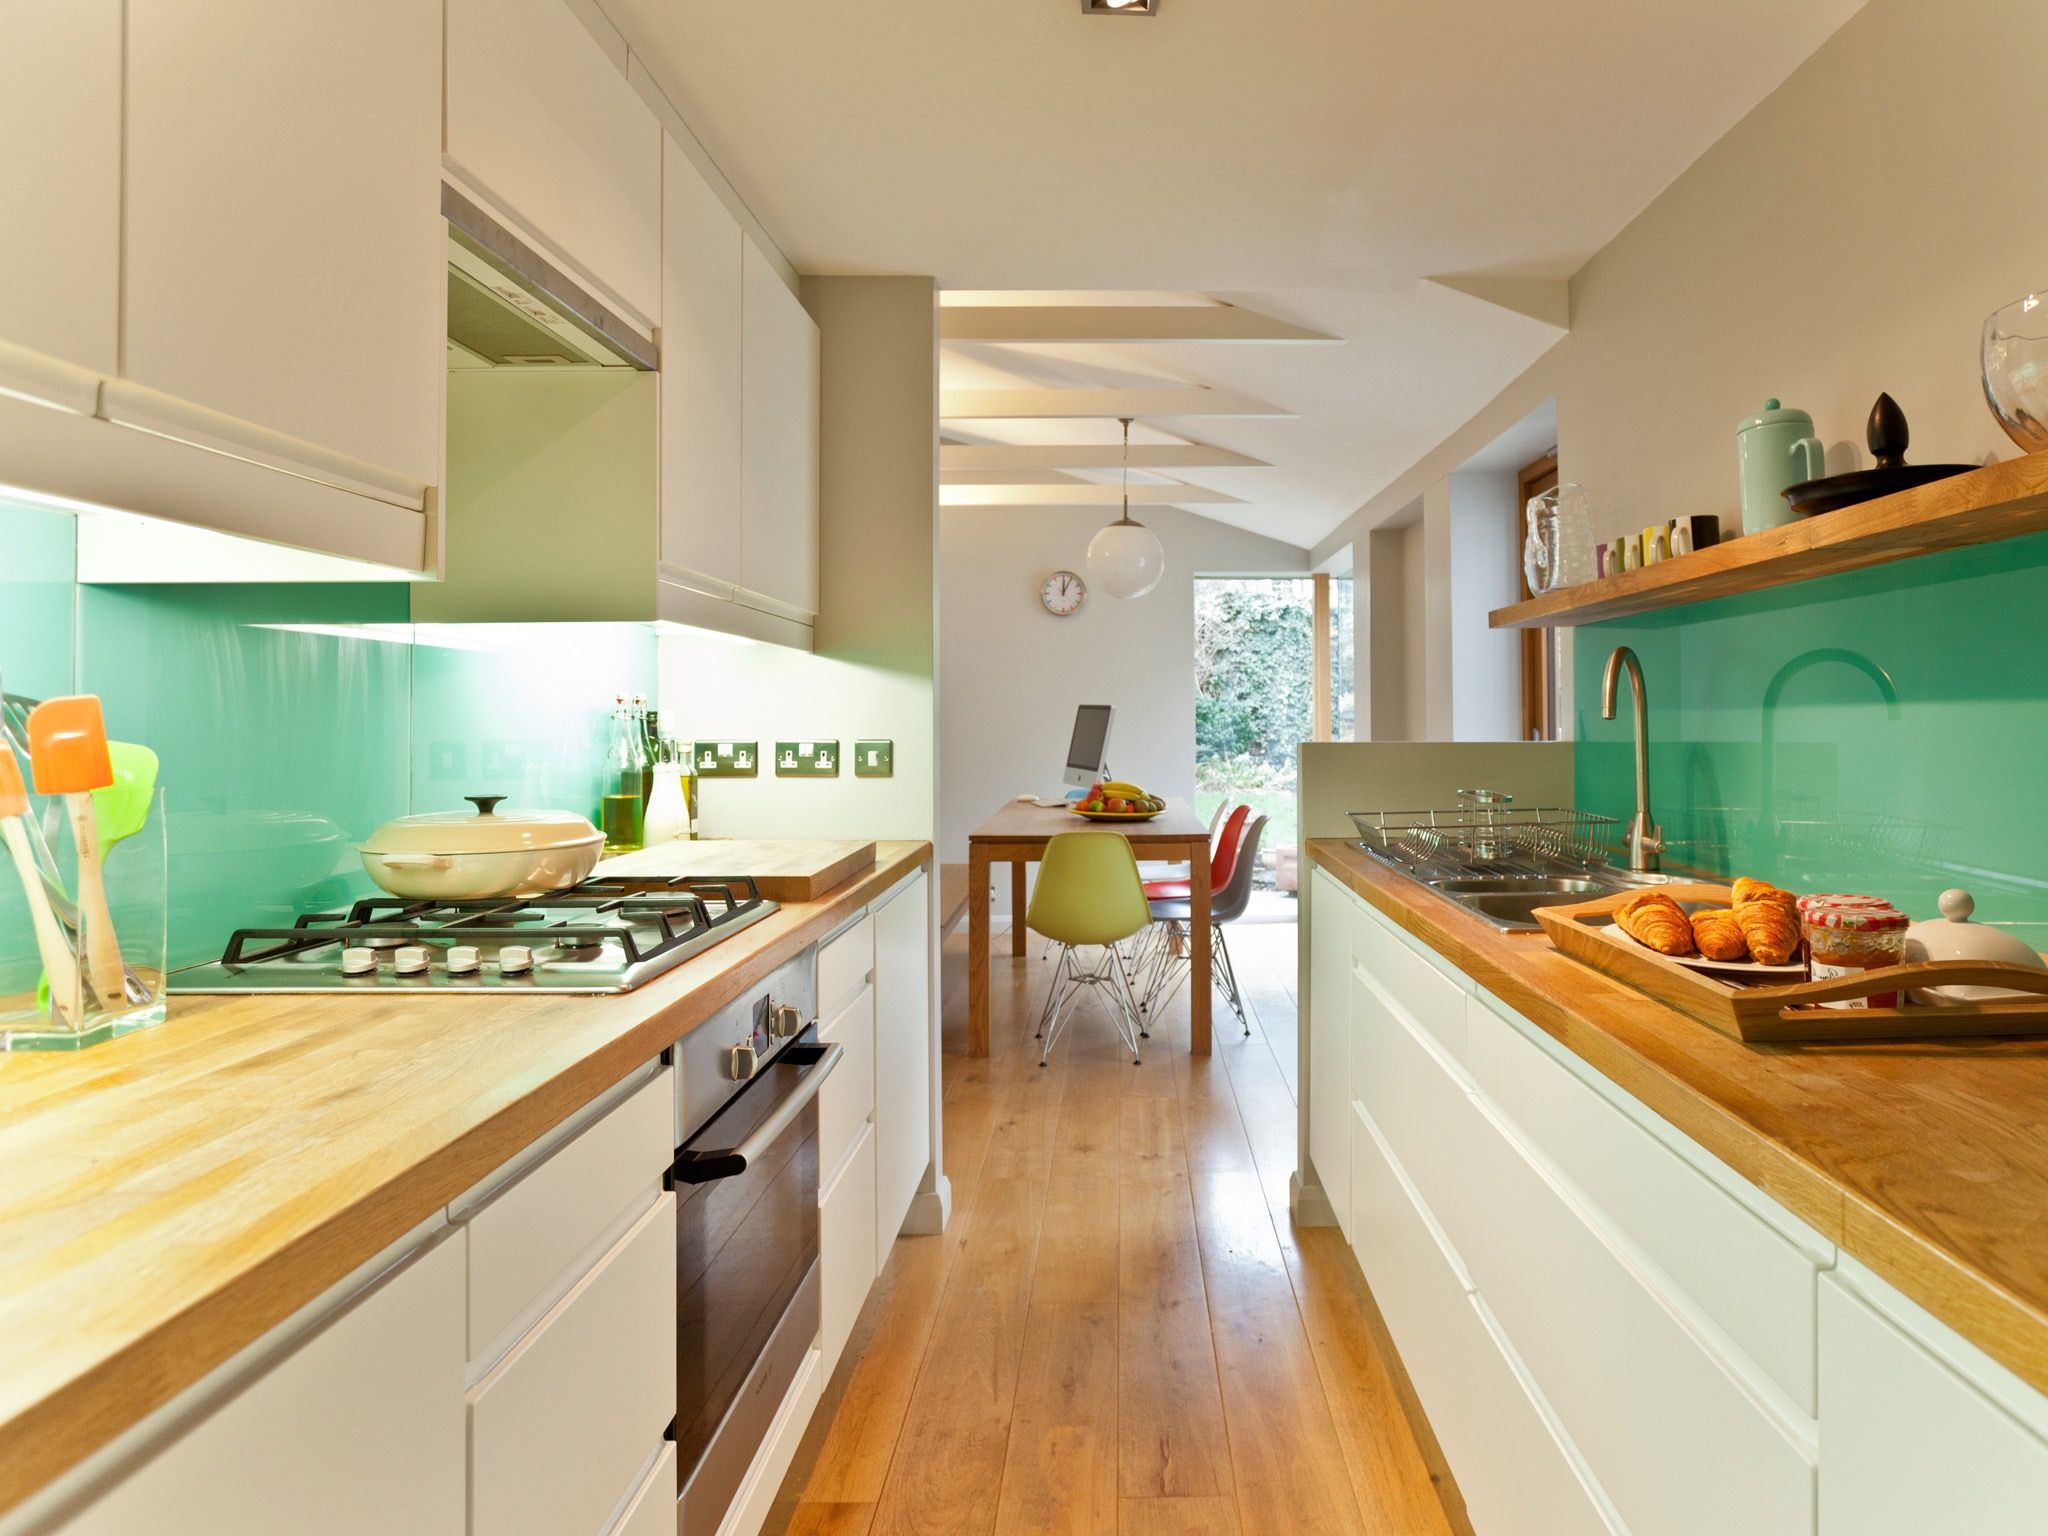 narrow kitchen counterop with seating design